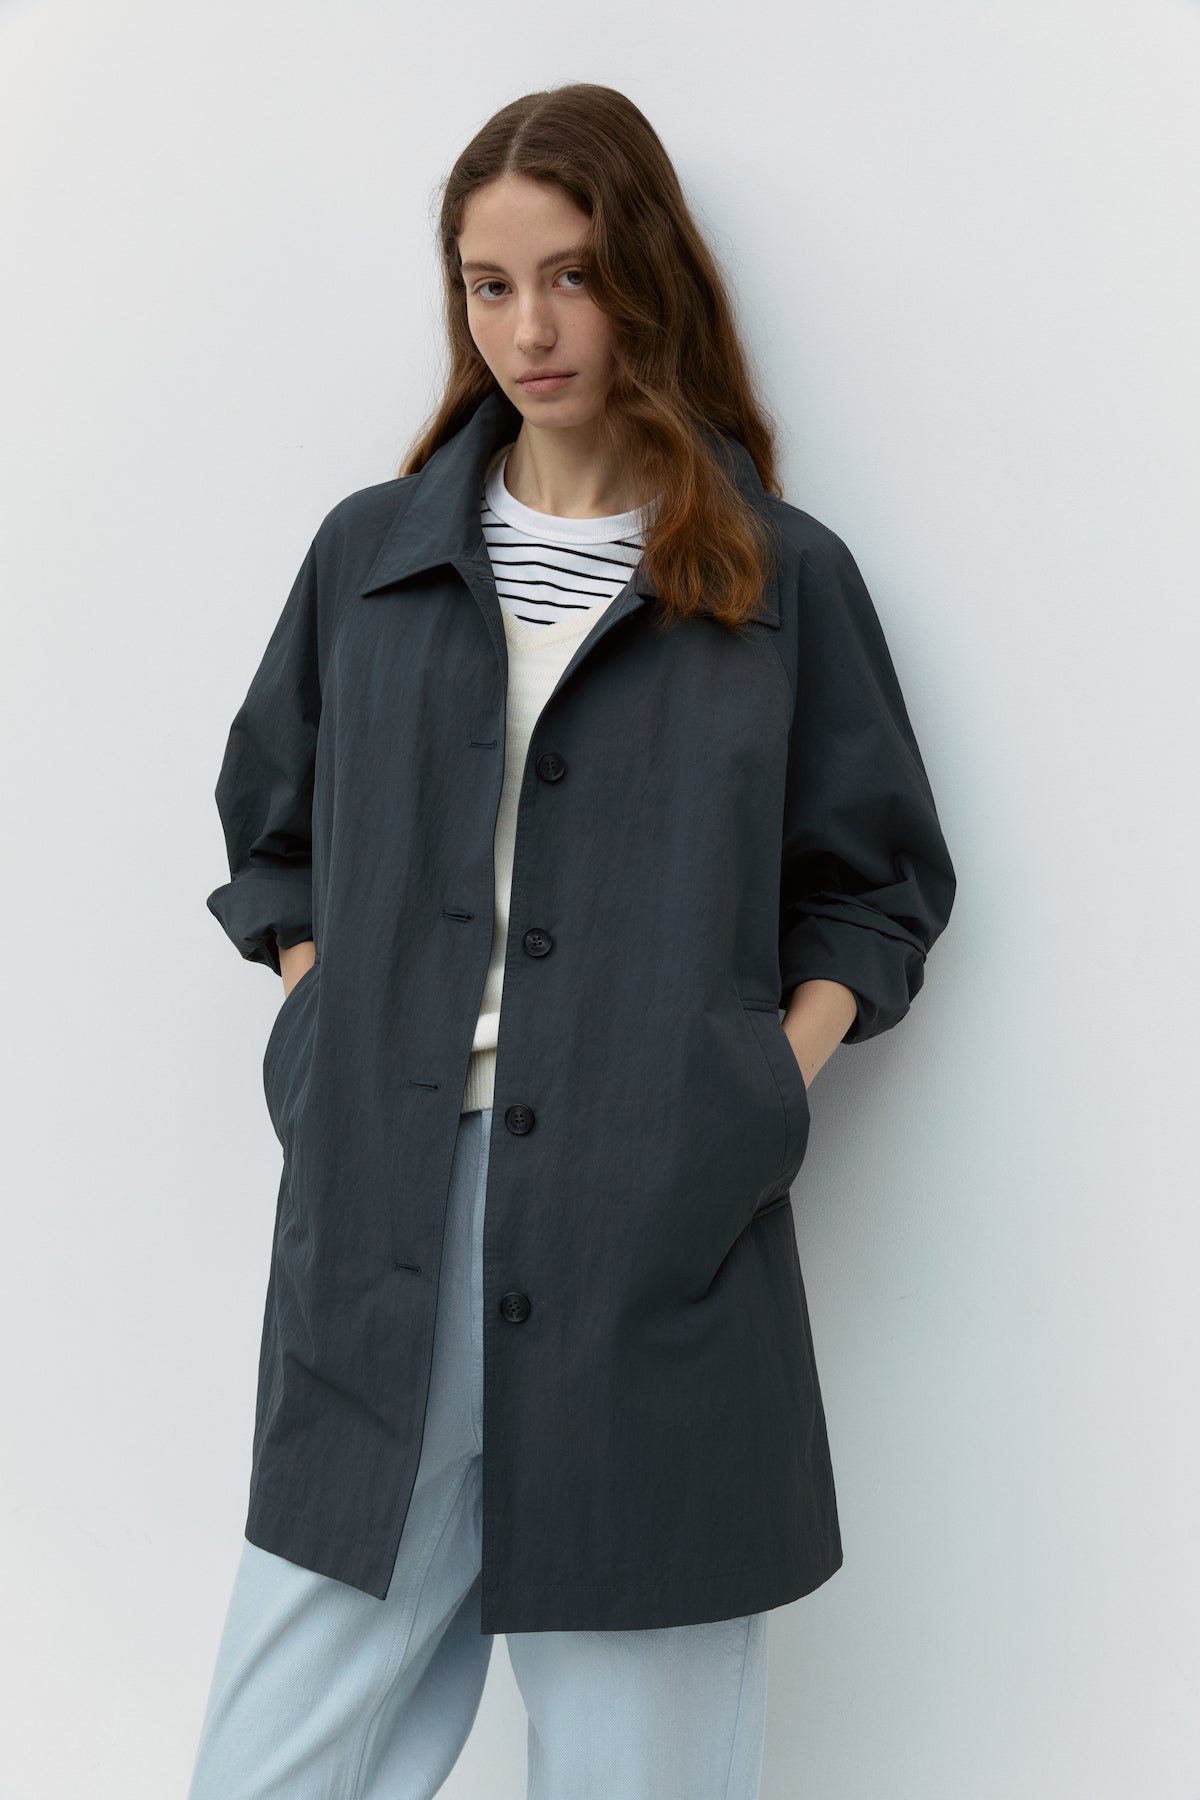 Classic Half Trench Coat In Charcoal